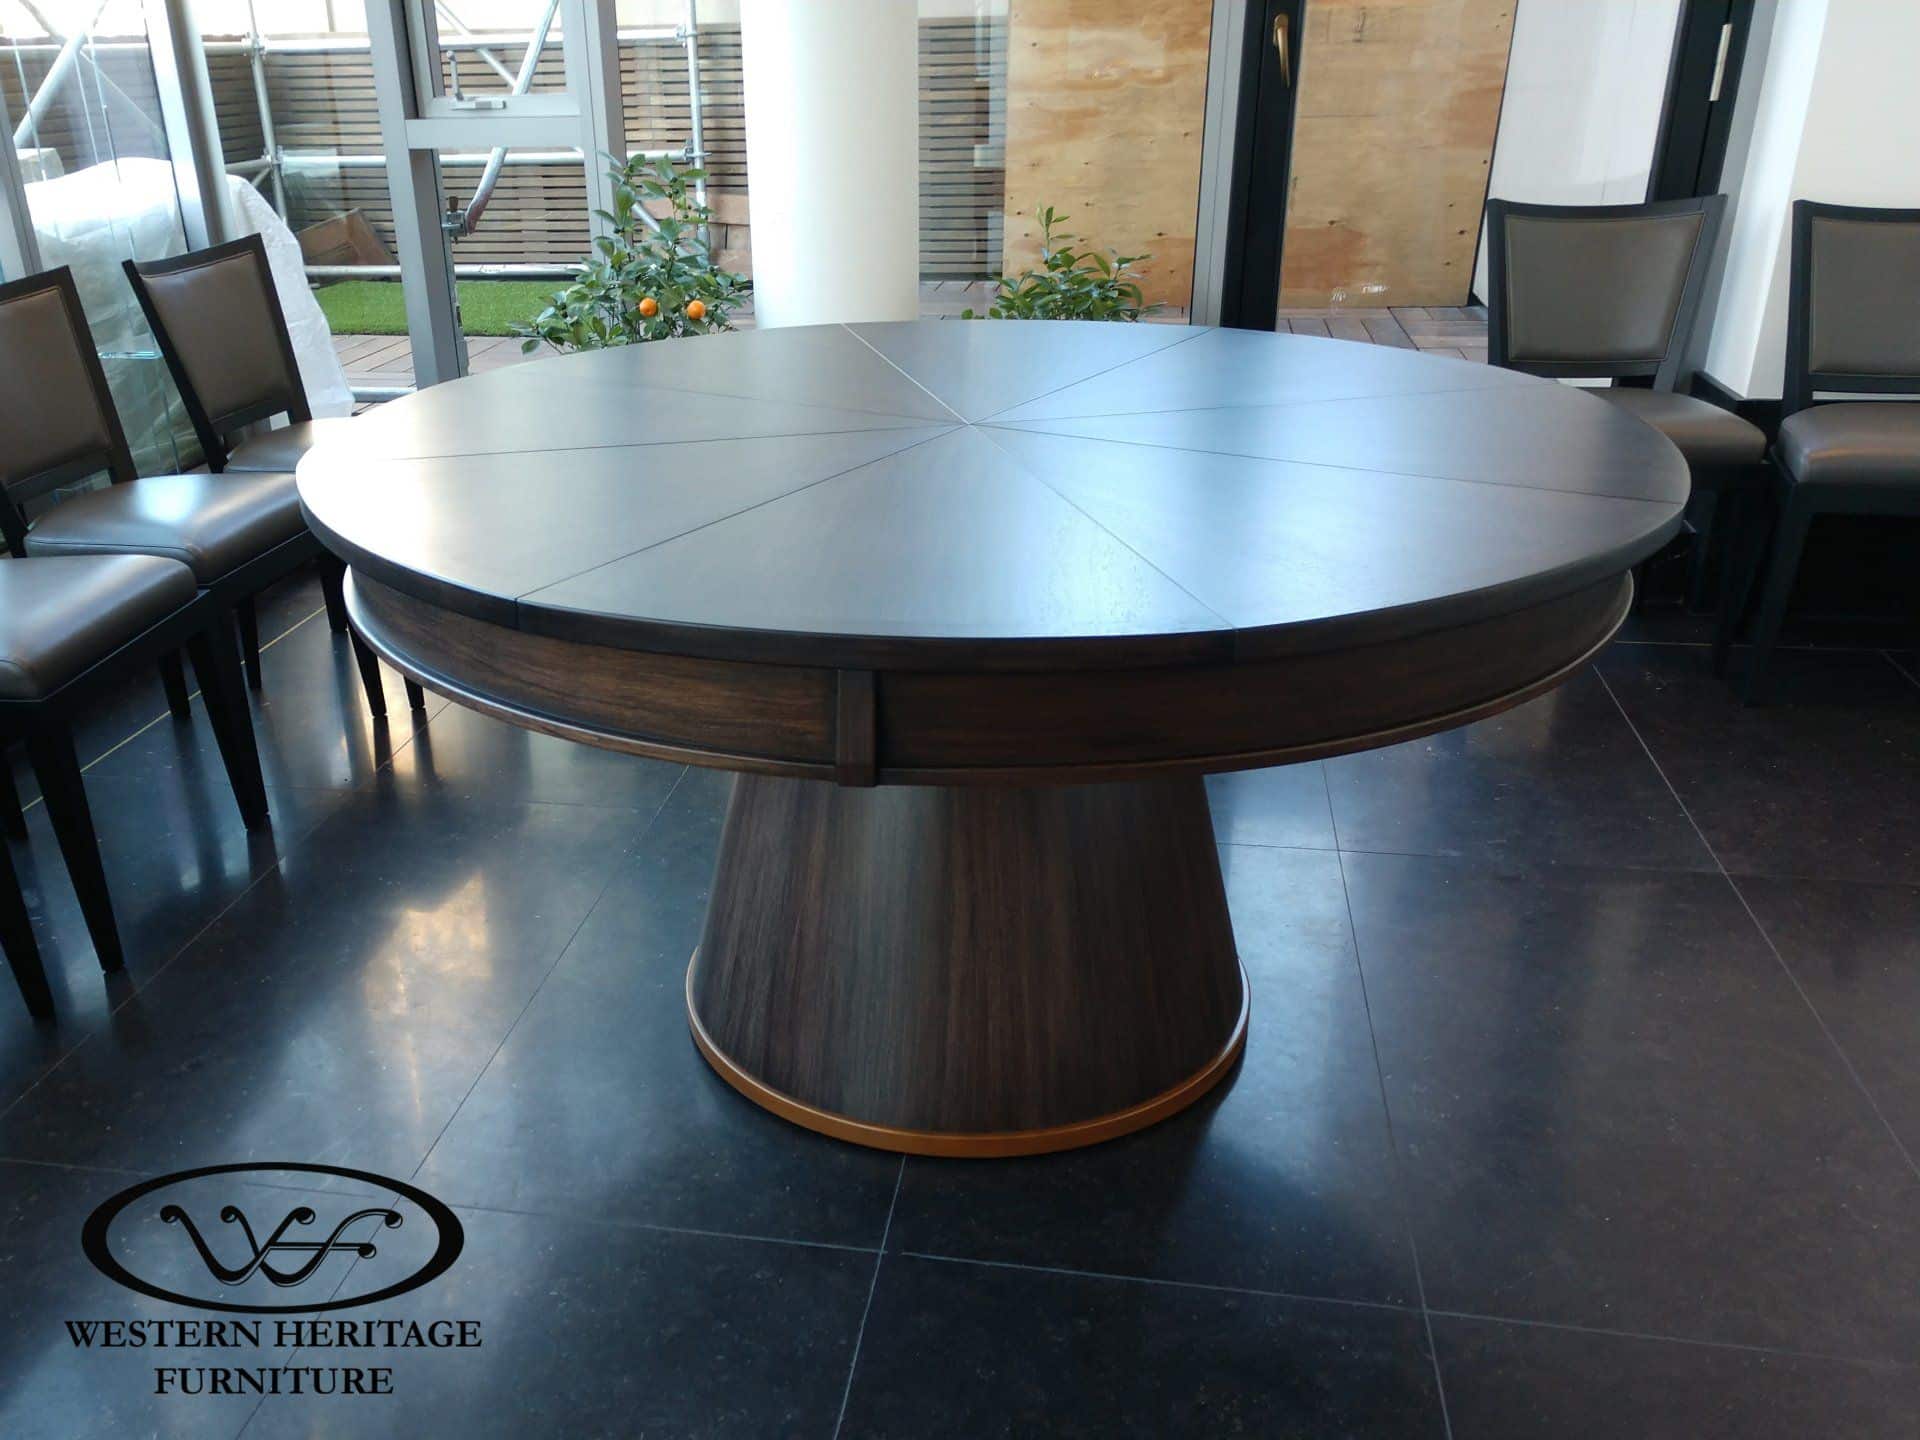 8 Leaf Expanding Round Table Client Photo - The Hazen Table